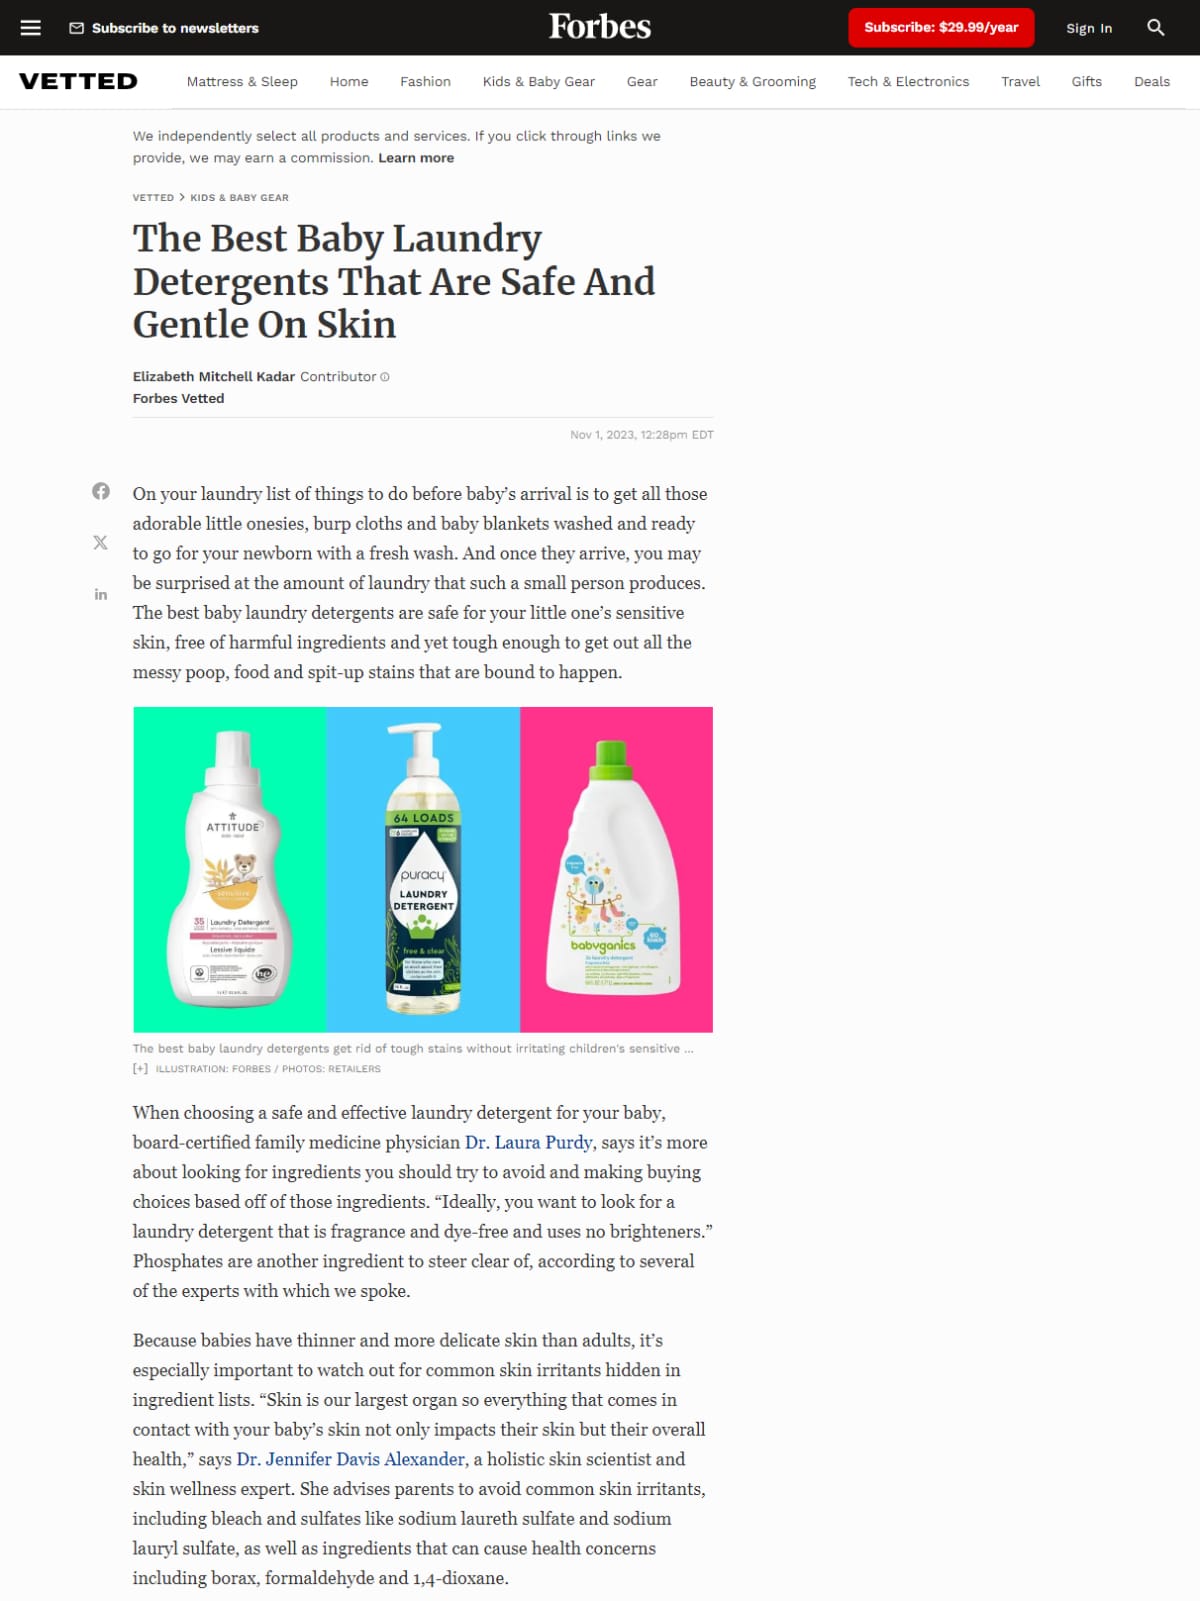 The Best Baby Laundry